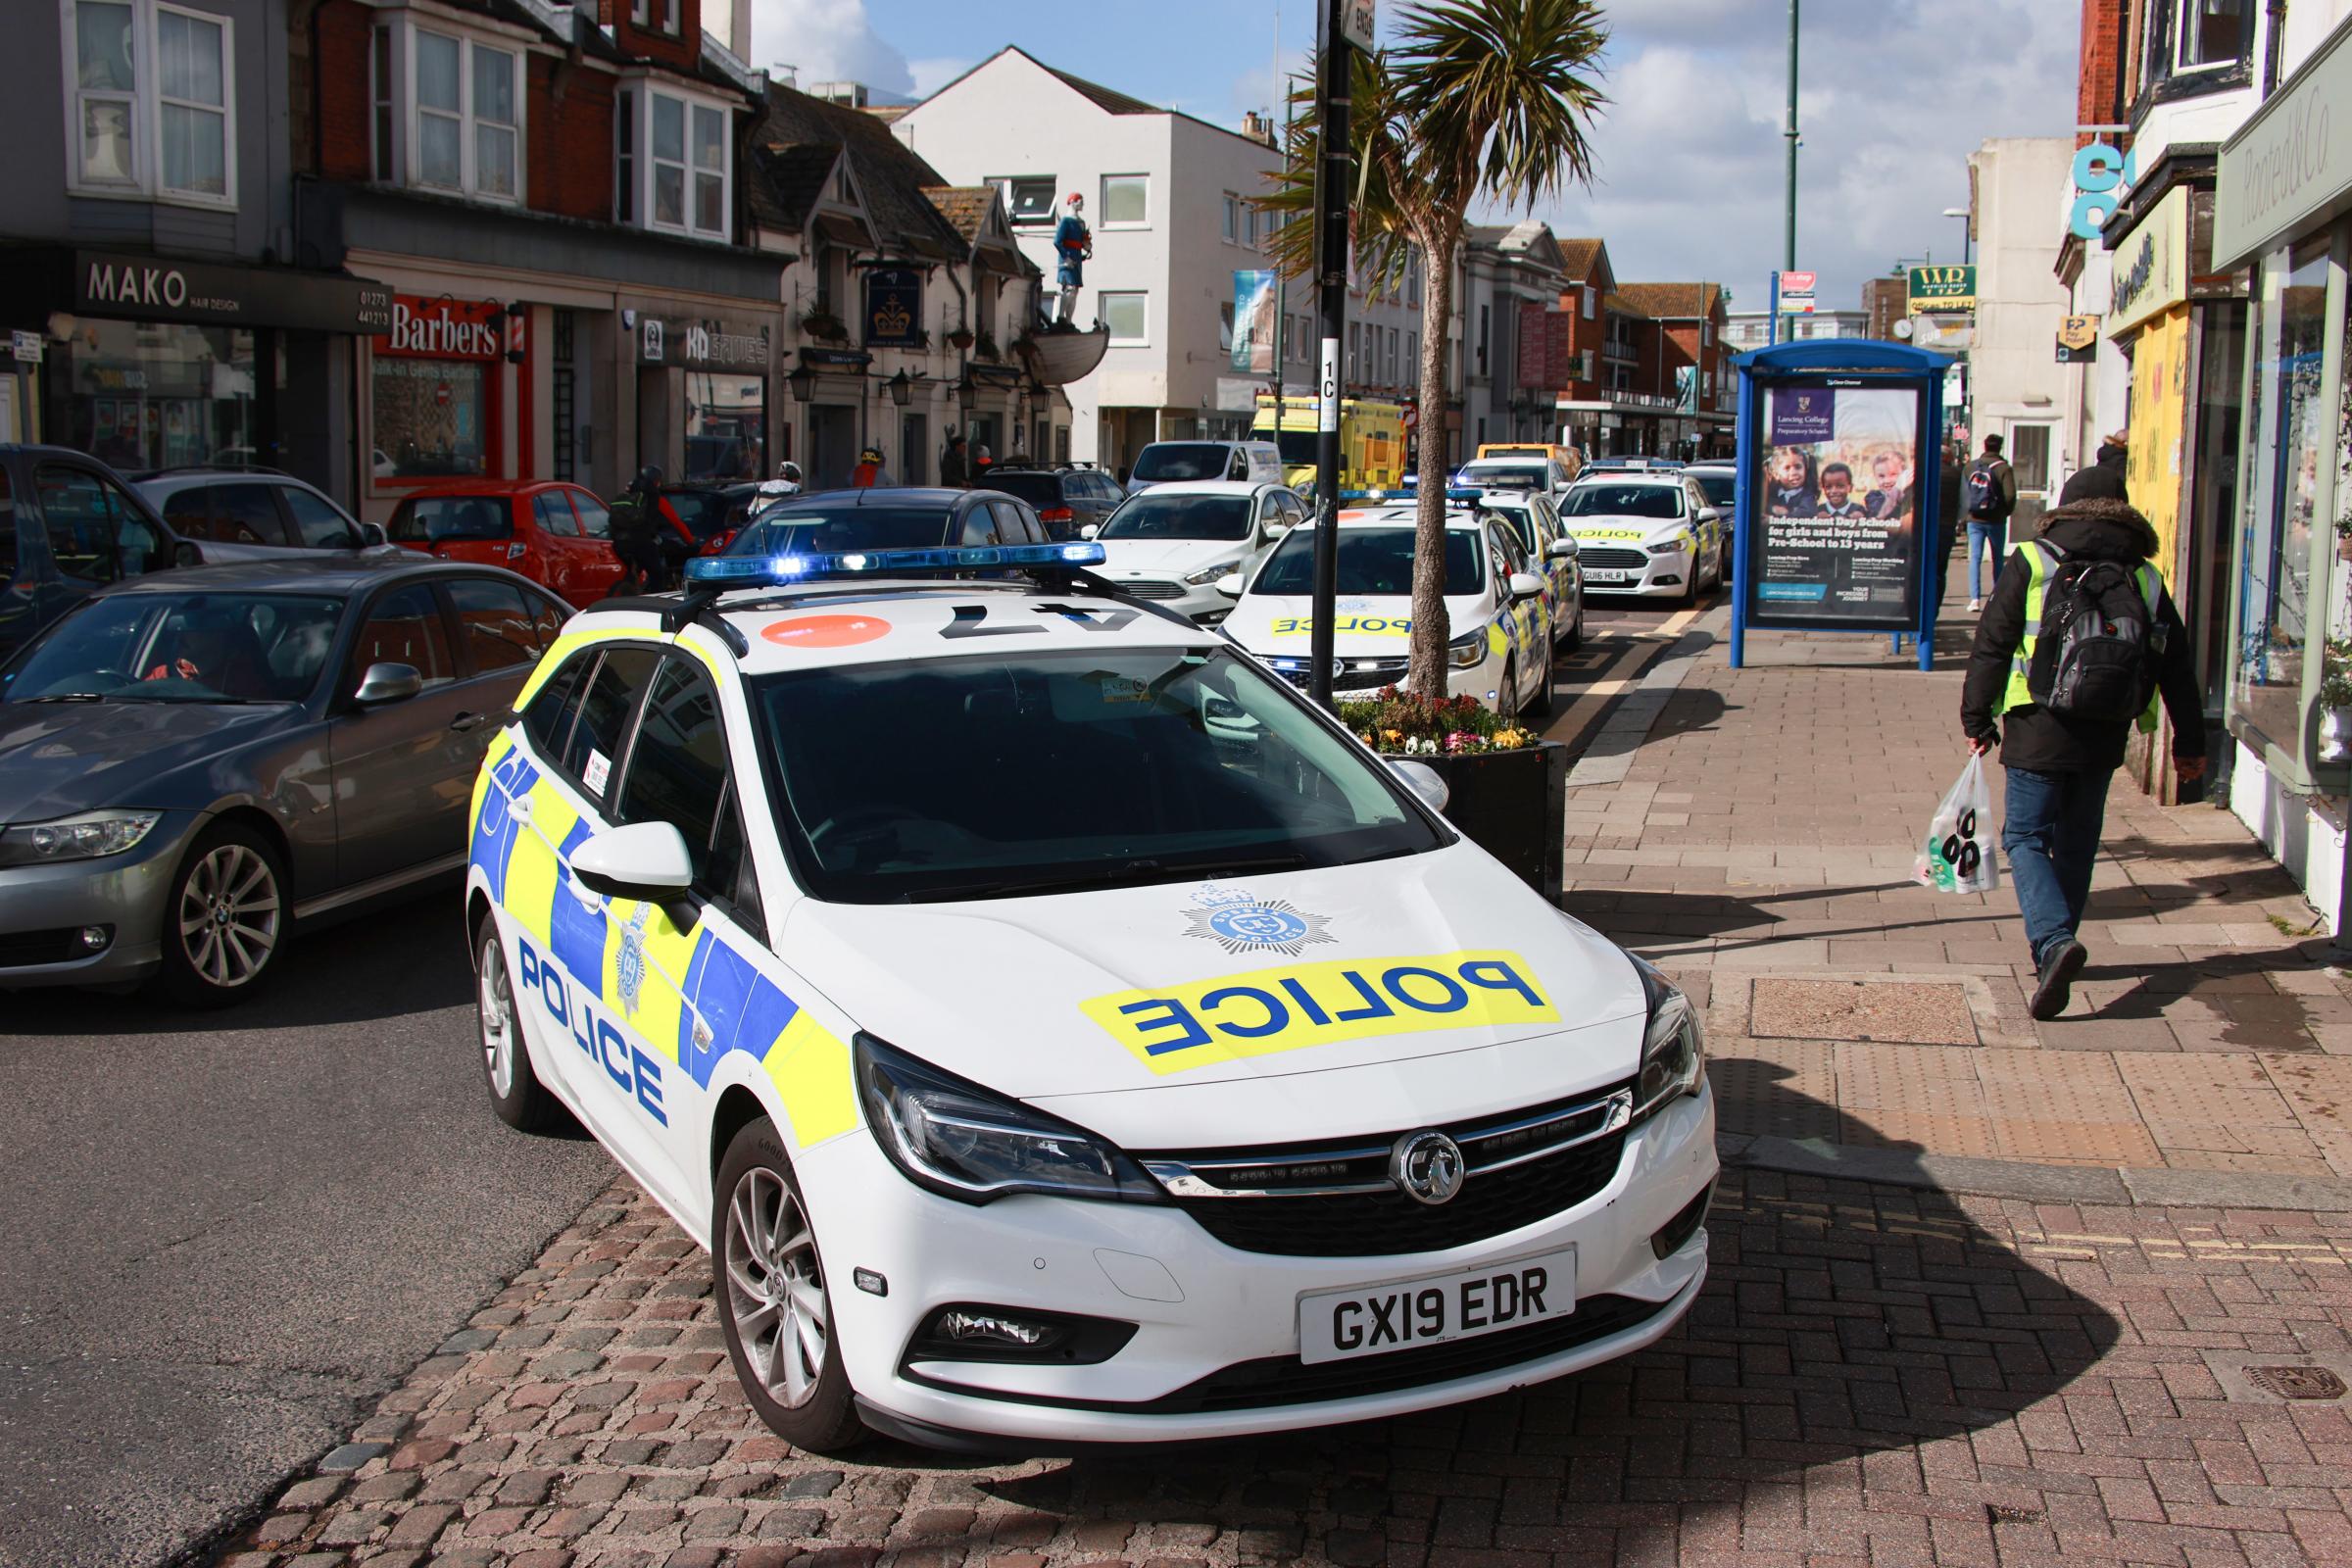 Police and paramedics were called over reports of a woman in distress in Shoreham High Street